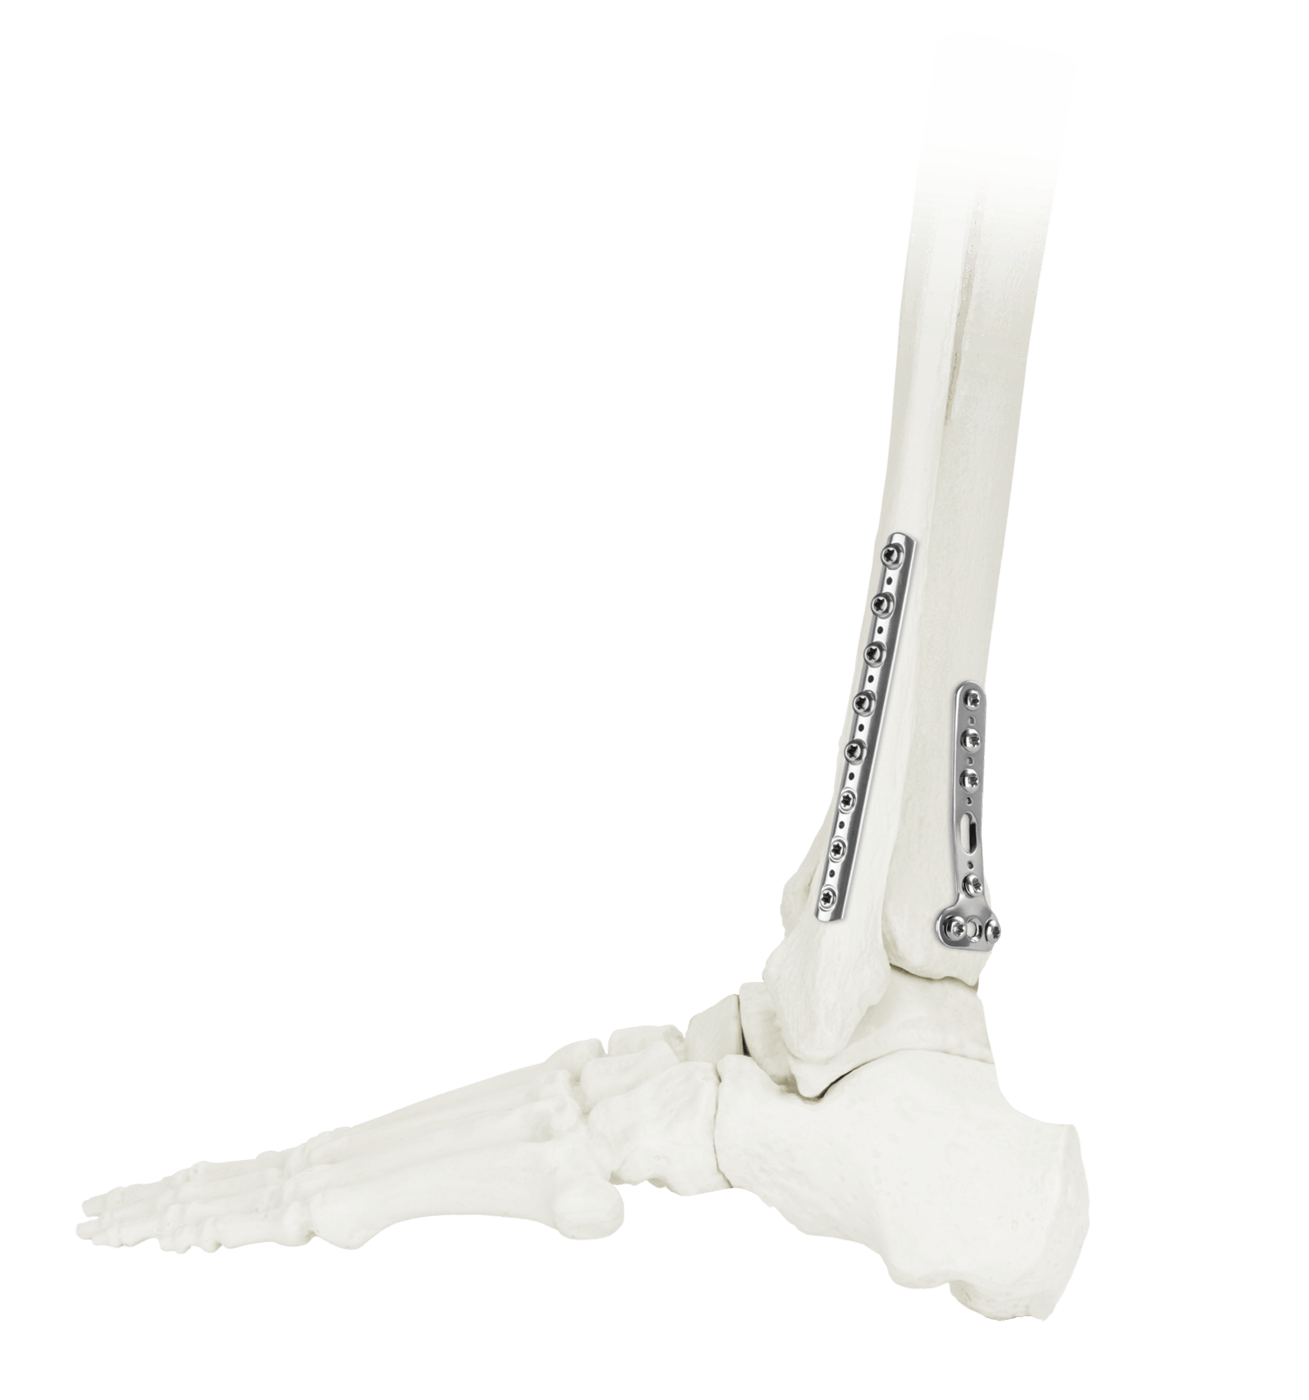 ANTHEM® Small Fragment Fracture System Final Construct